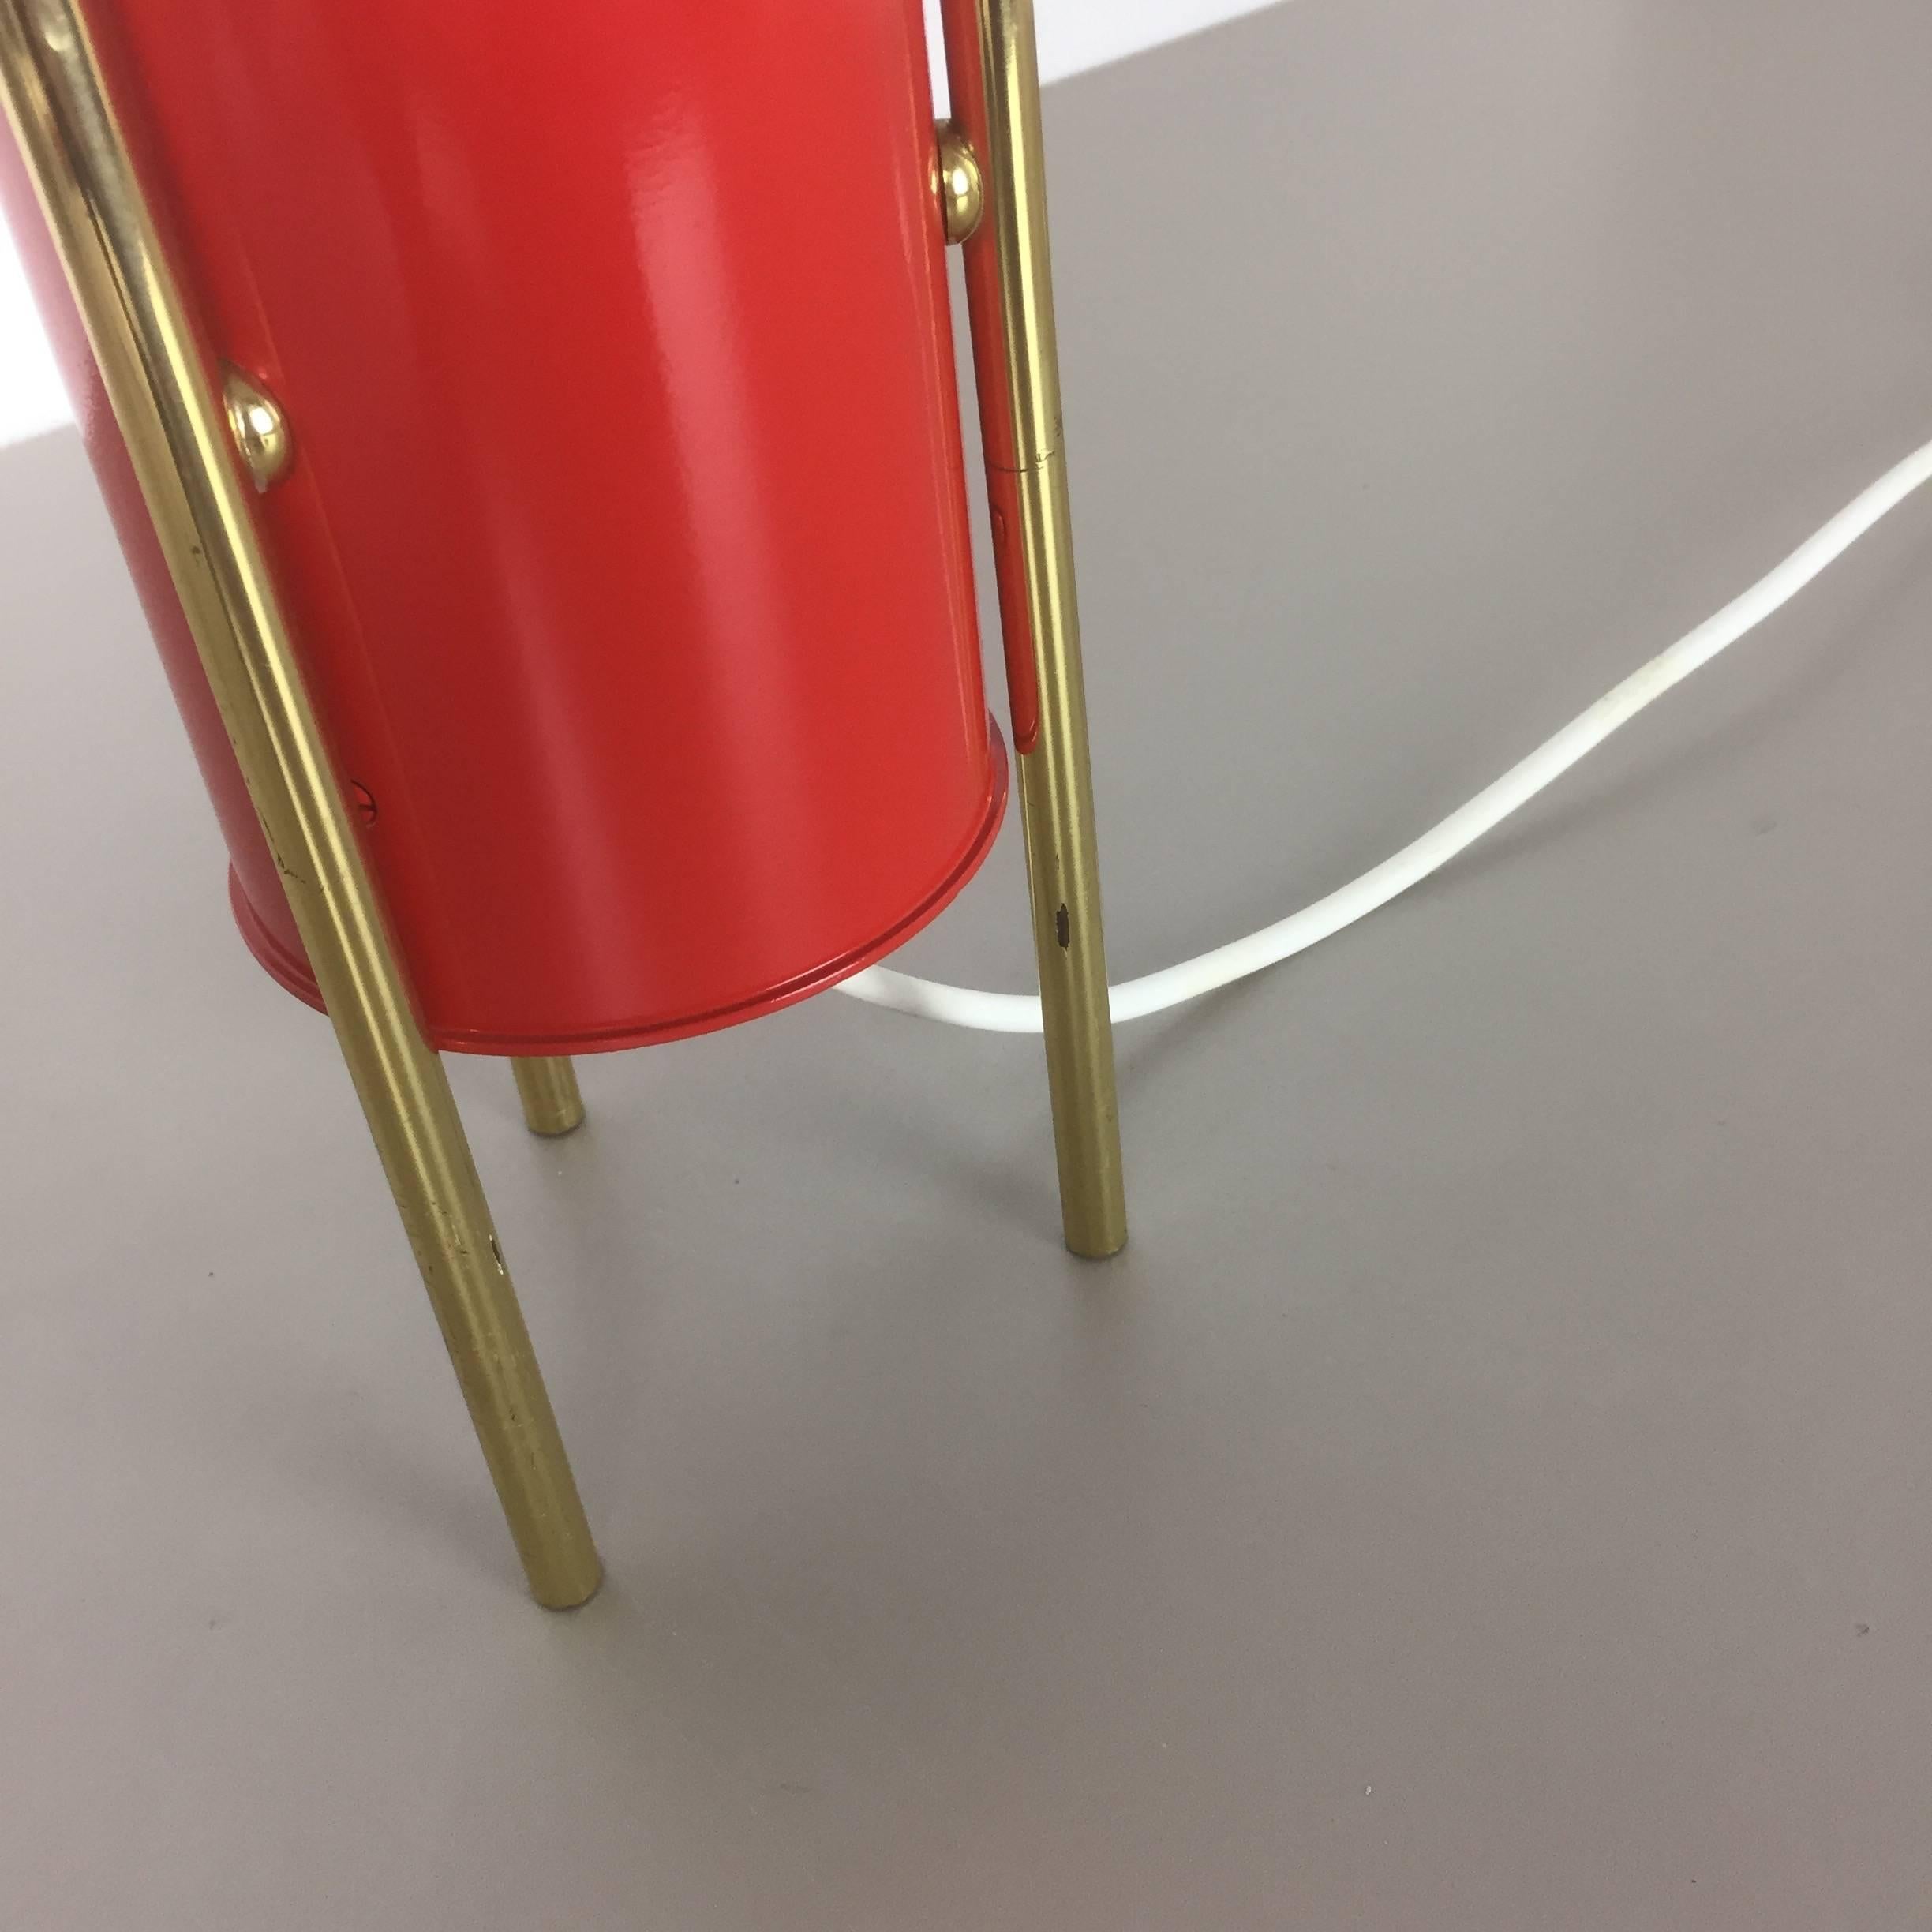 Metal Vintage 1960s Modernist Midcentury Red Tripod Table Light Made in Italy, 1960s